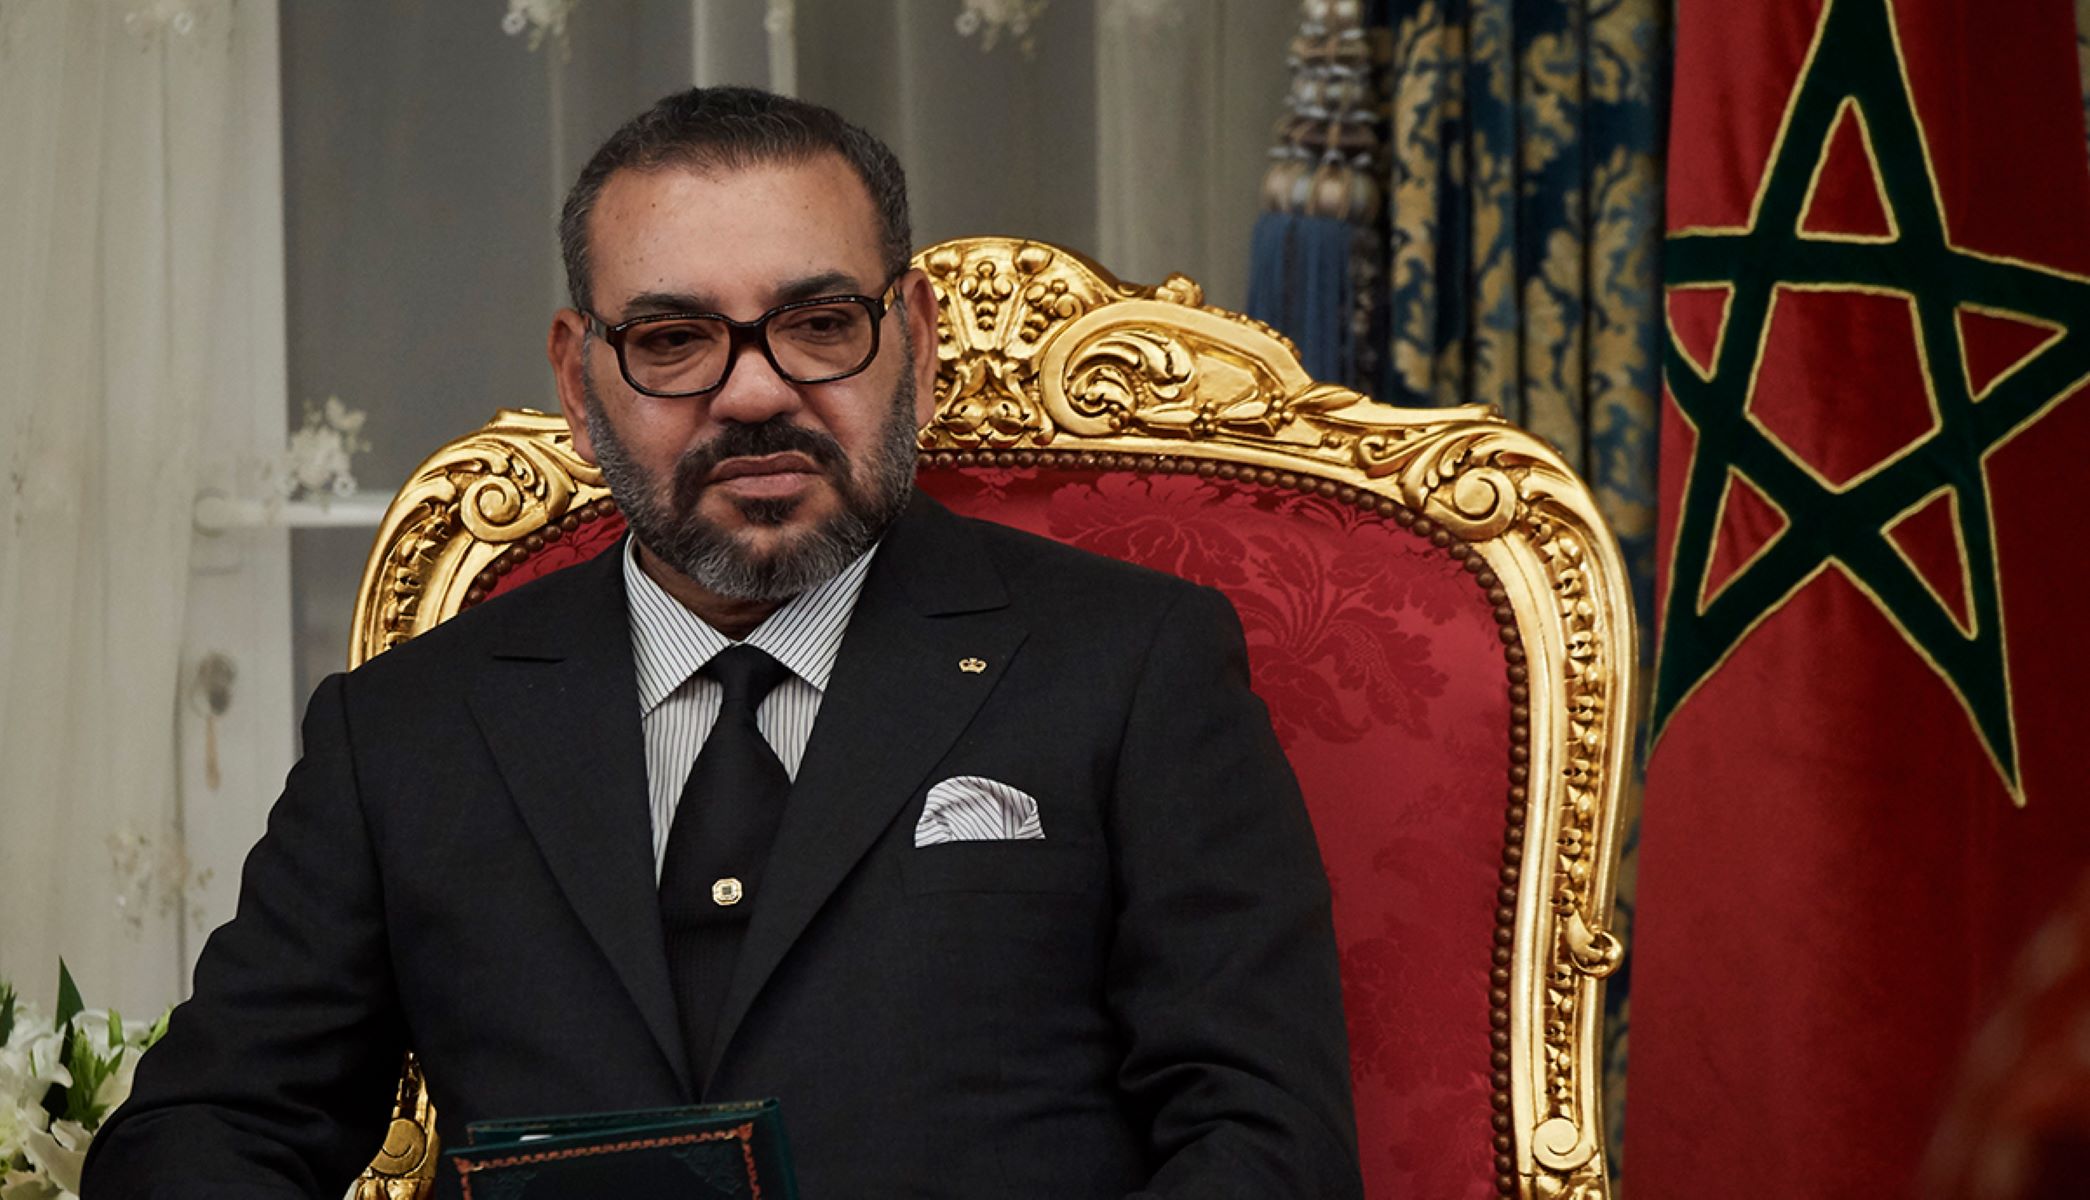 11-intriguing-facts-about-king-mohammed-vi